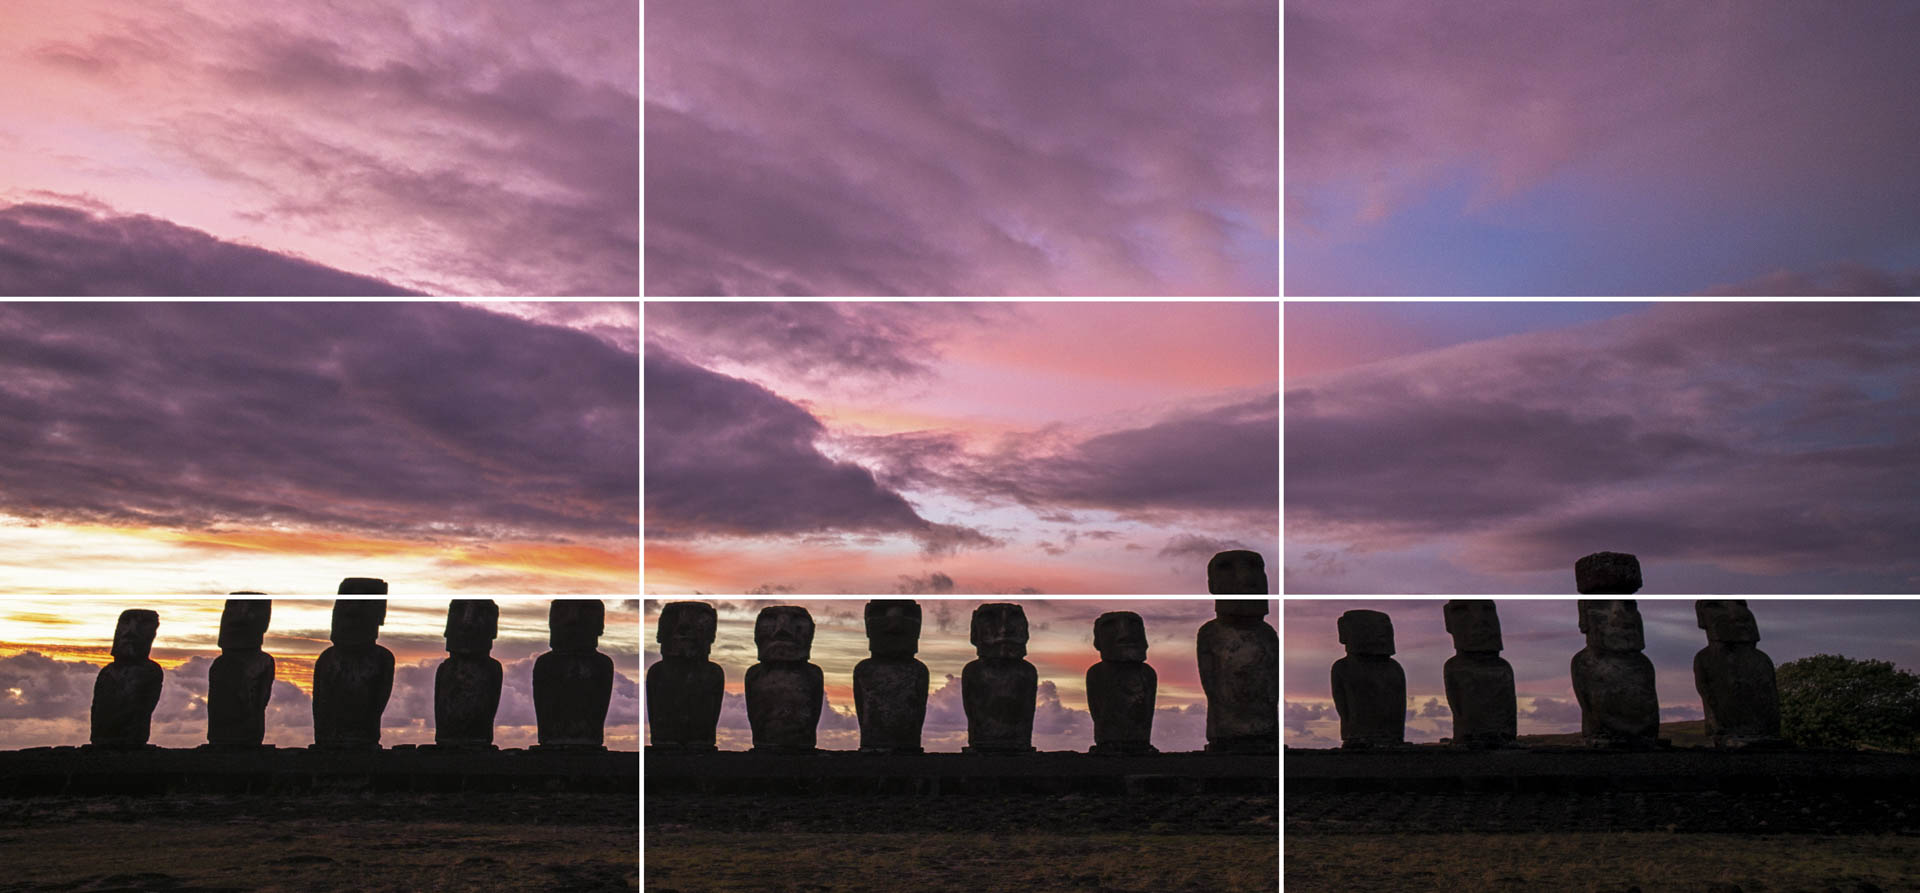 The Rule of Thirds - Tips and Tricks from Light Source Journeys